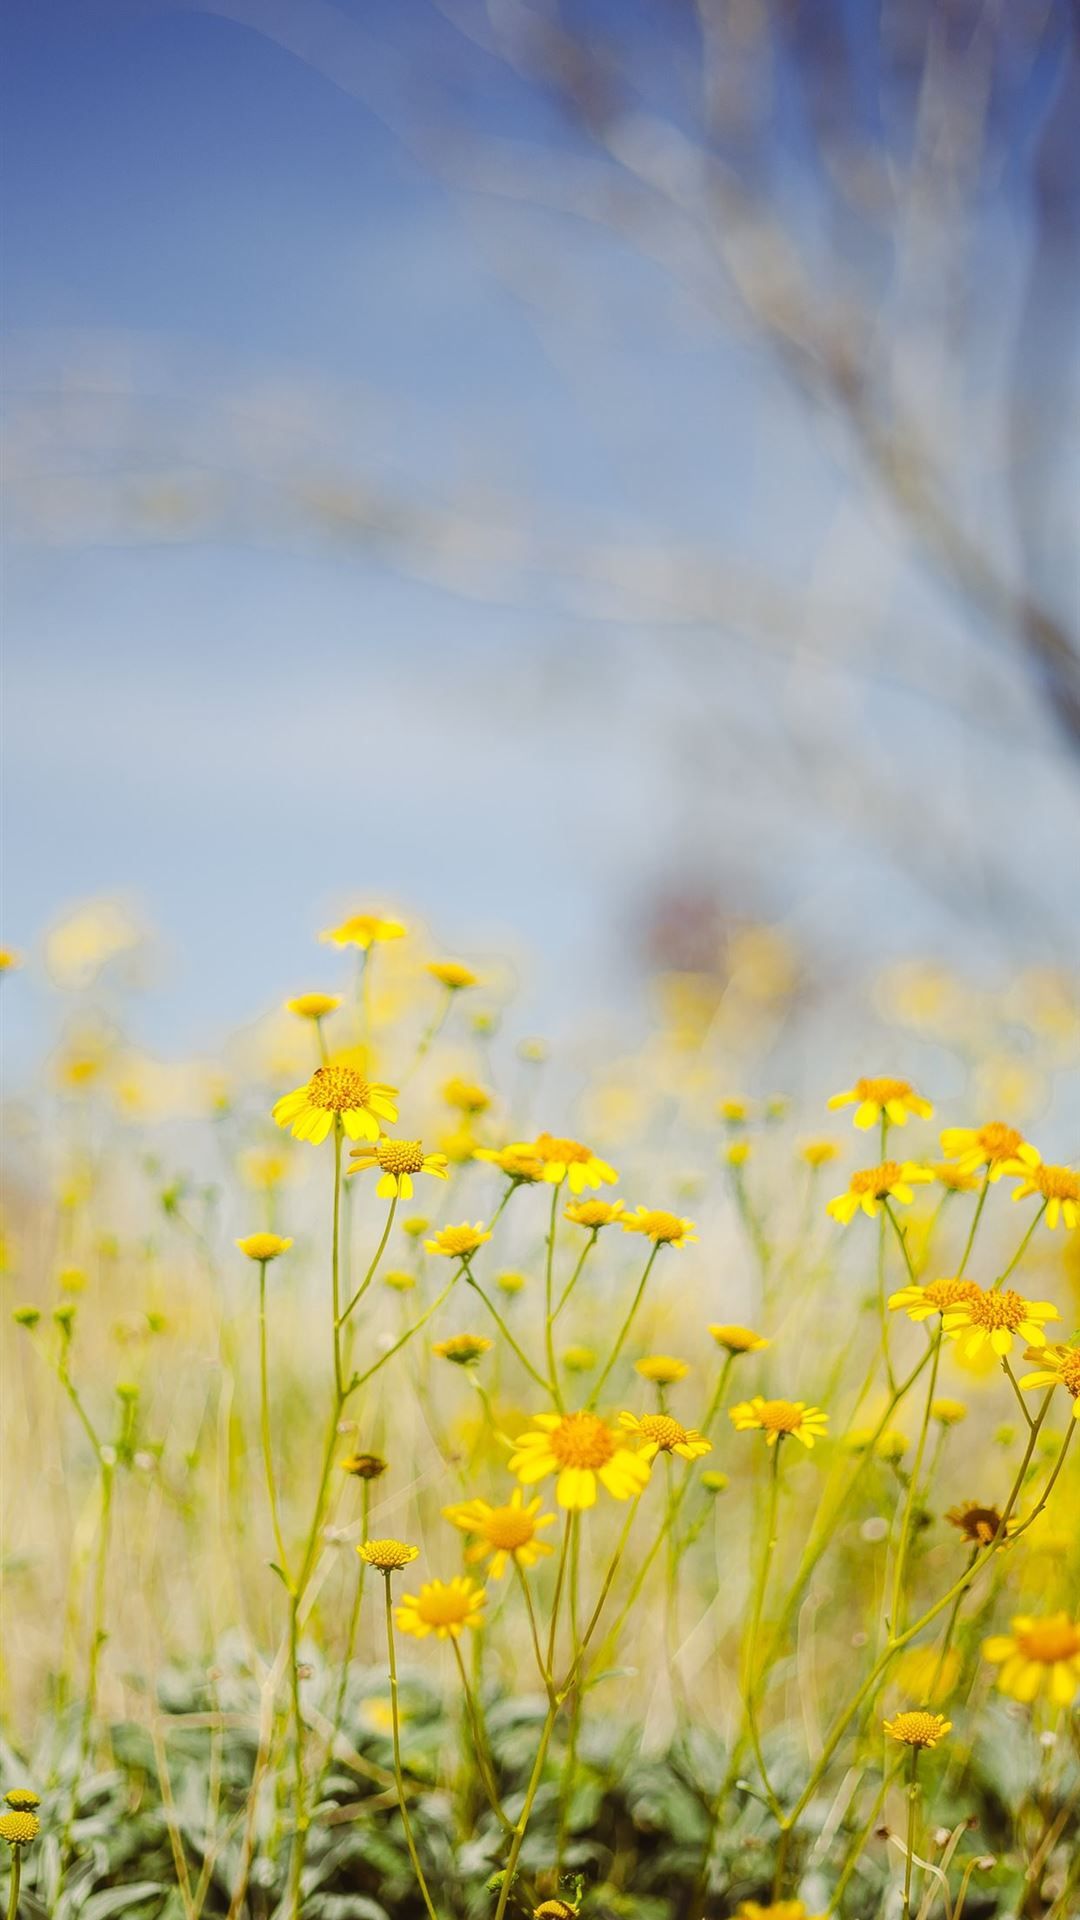 yellow flower field under blue sky during daytime iPhone 8 Wallpaper Free Download